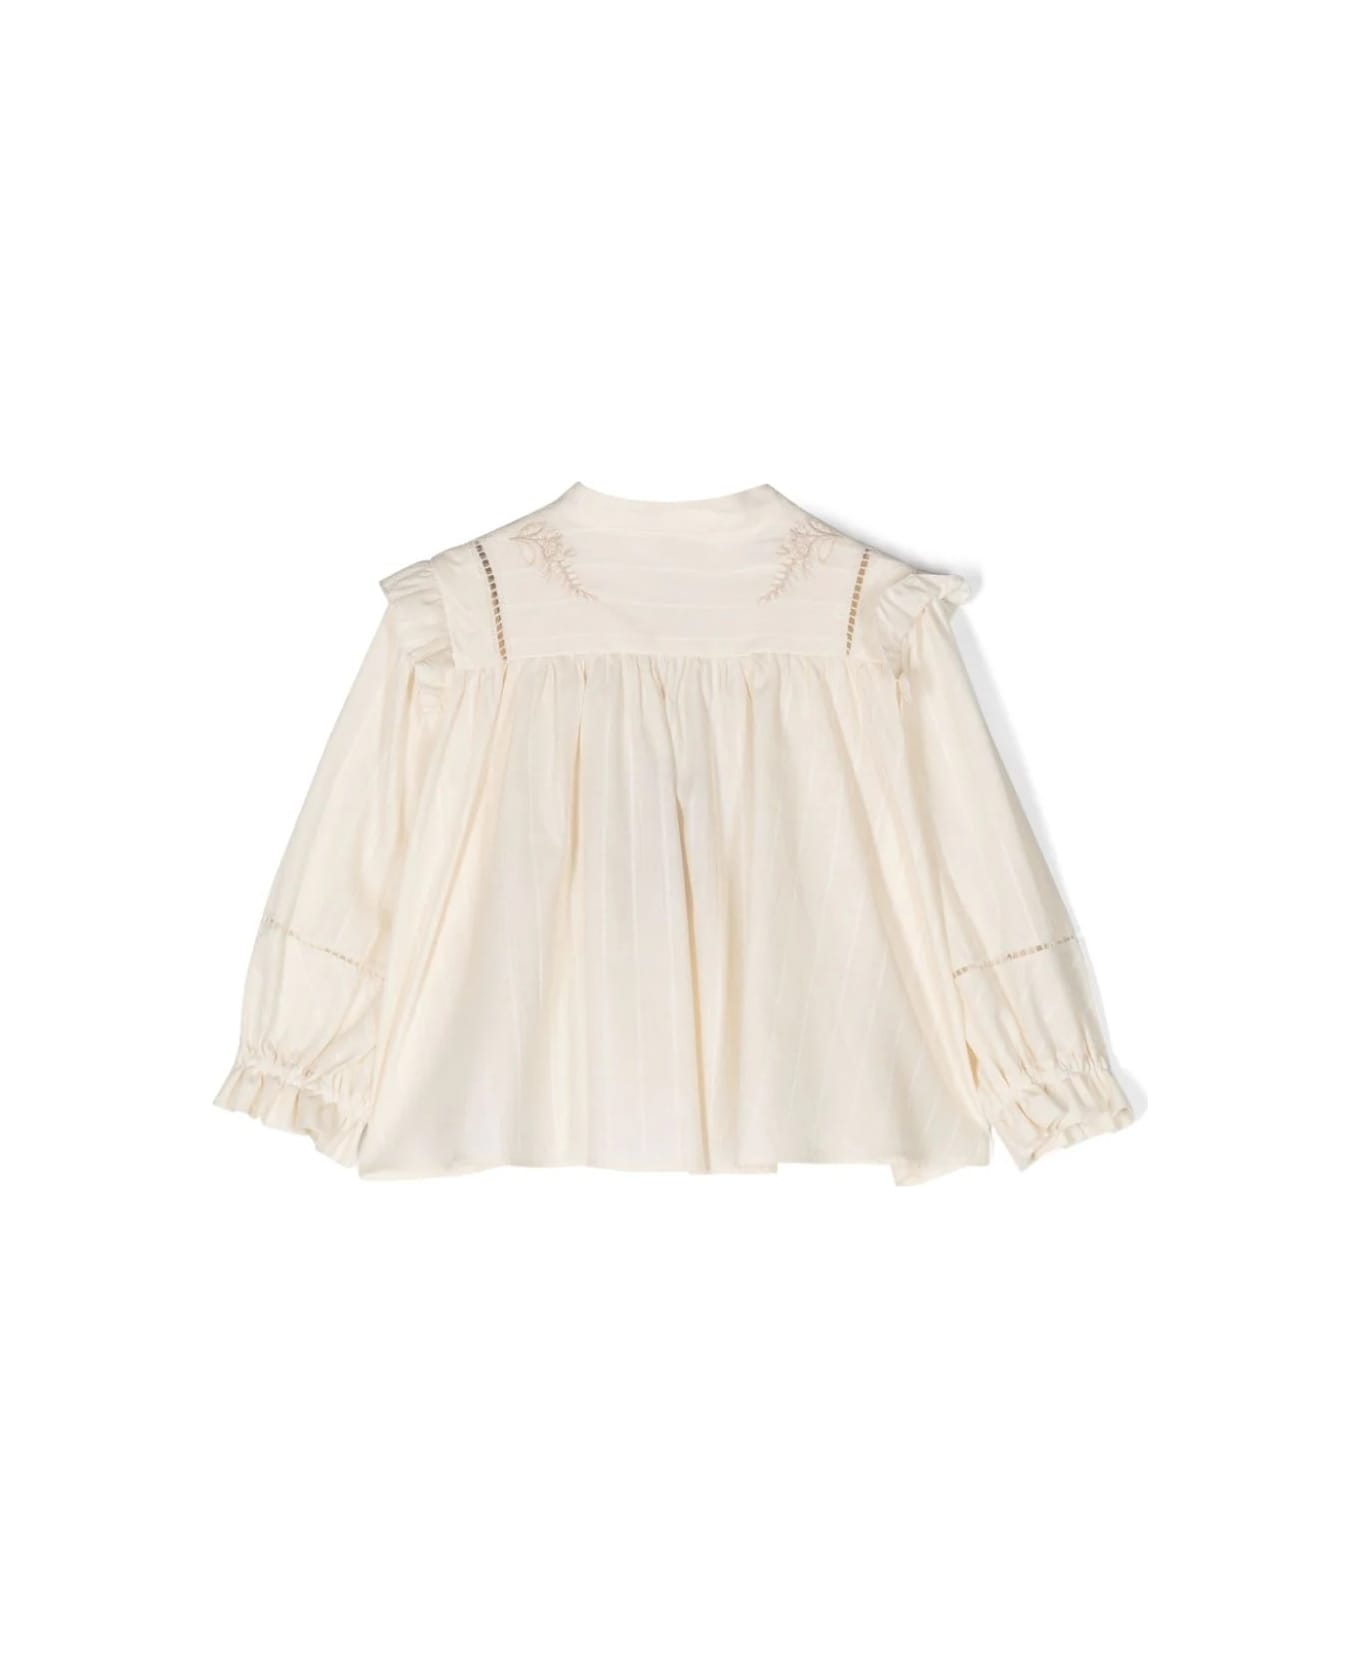 Etro Beige Pinstripe Blouse With Ruffles And Embroidery - Brown トップス